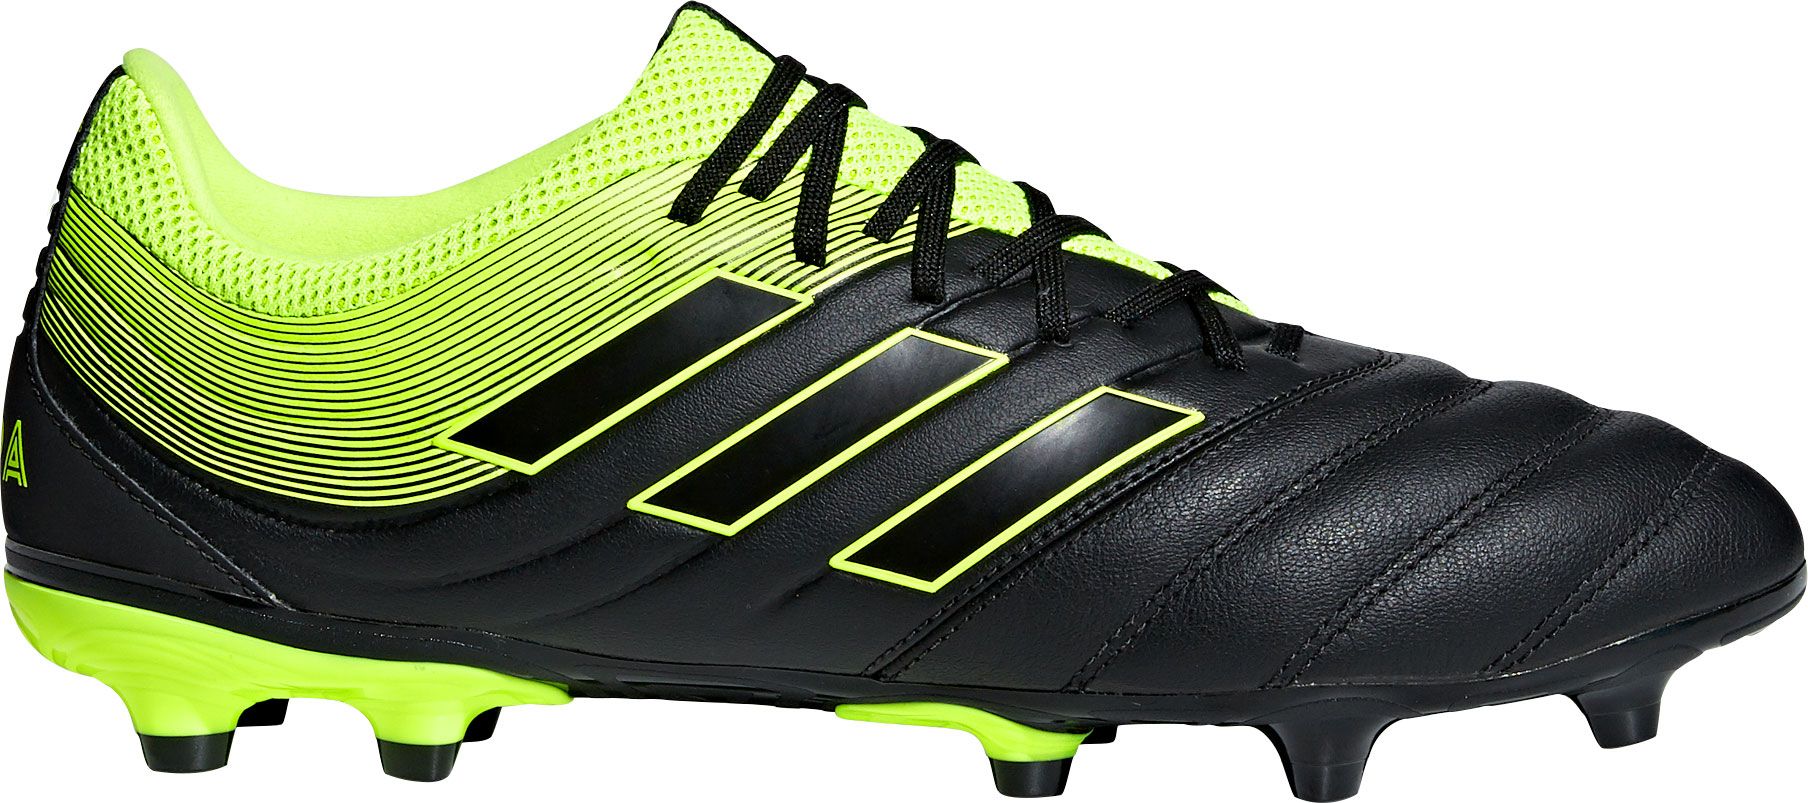 neon green adidas soccer cleats